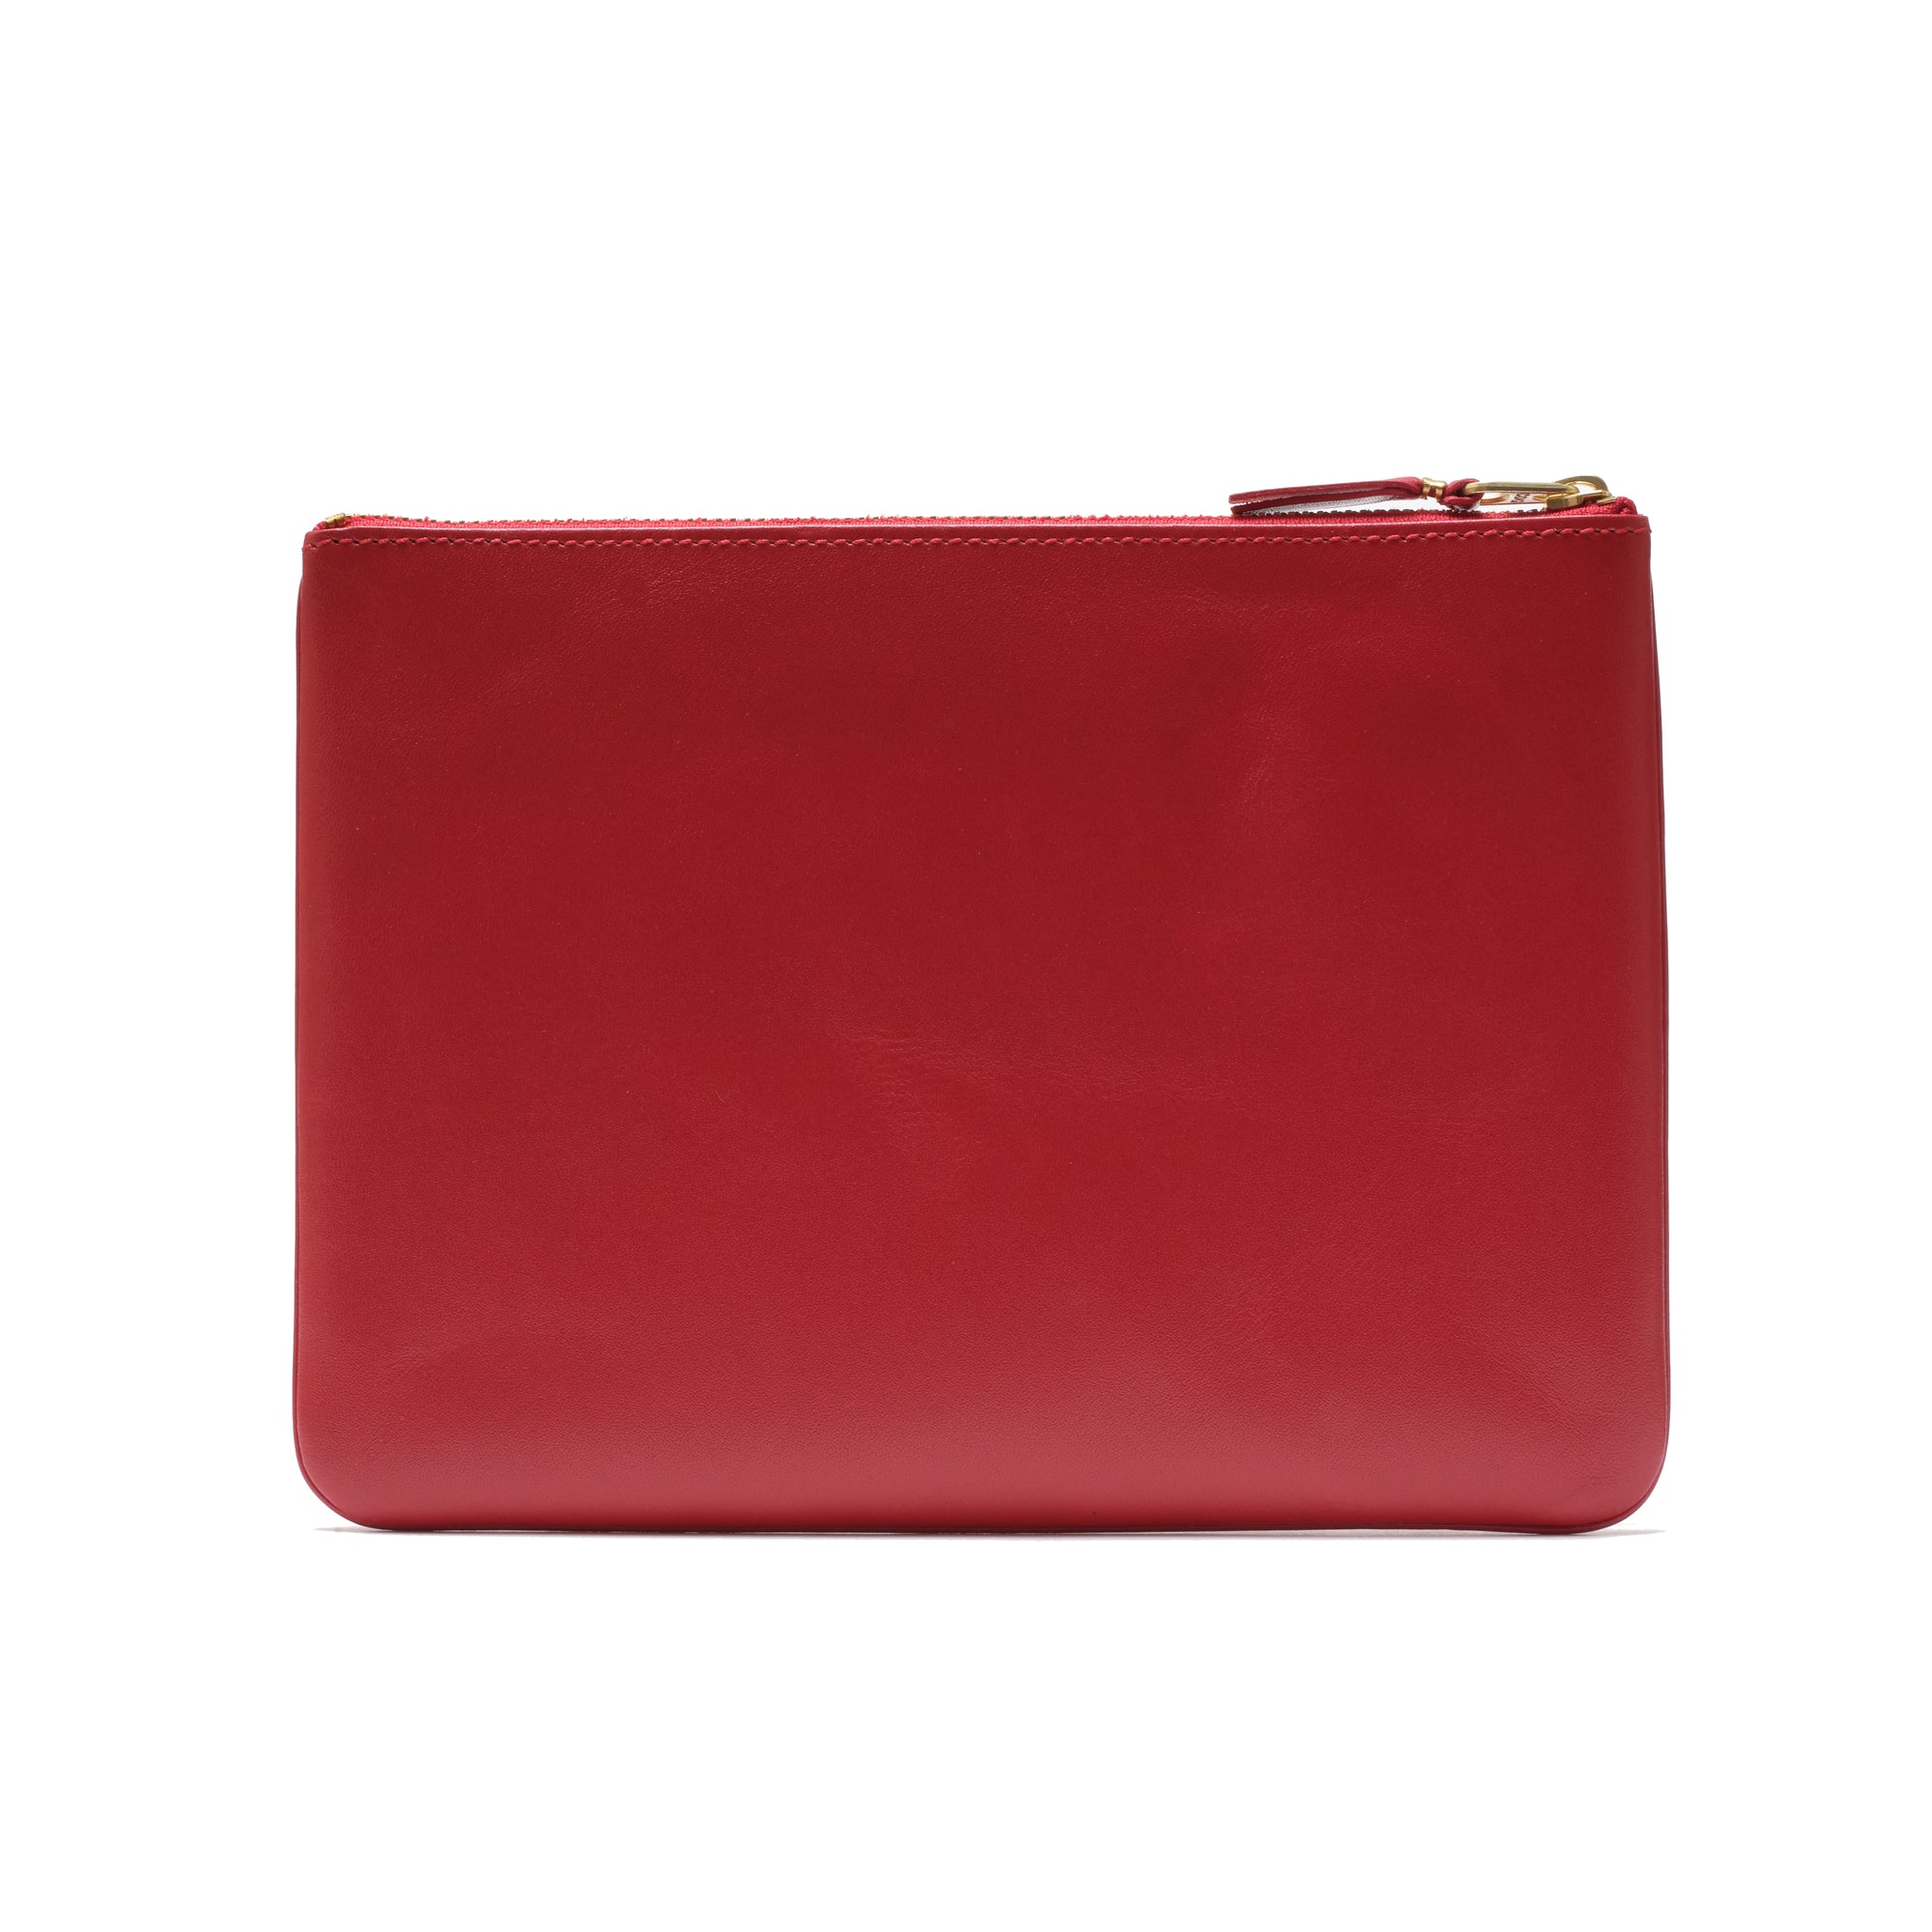 CDG WALLET - Colored Leather Line-A051 - (Red) view 2